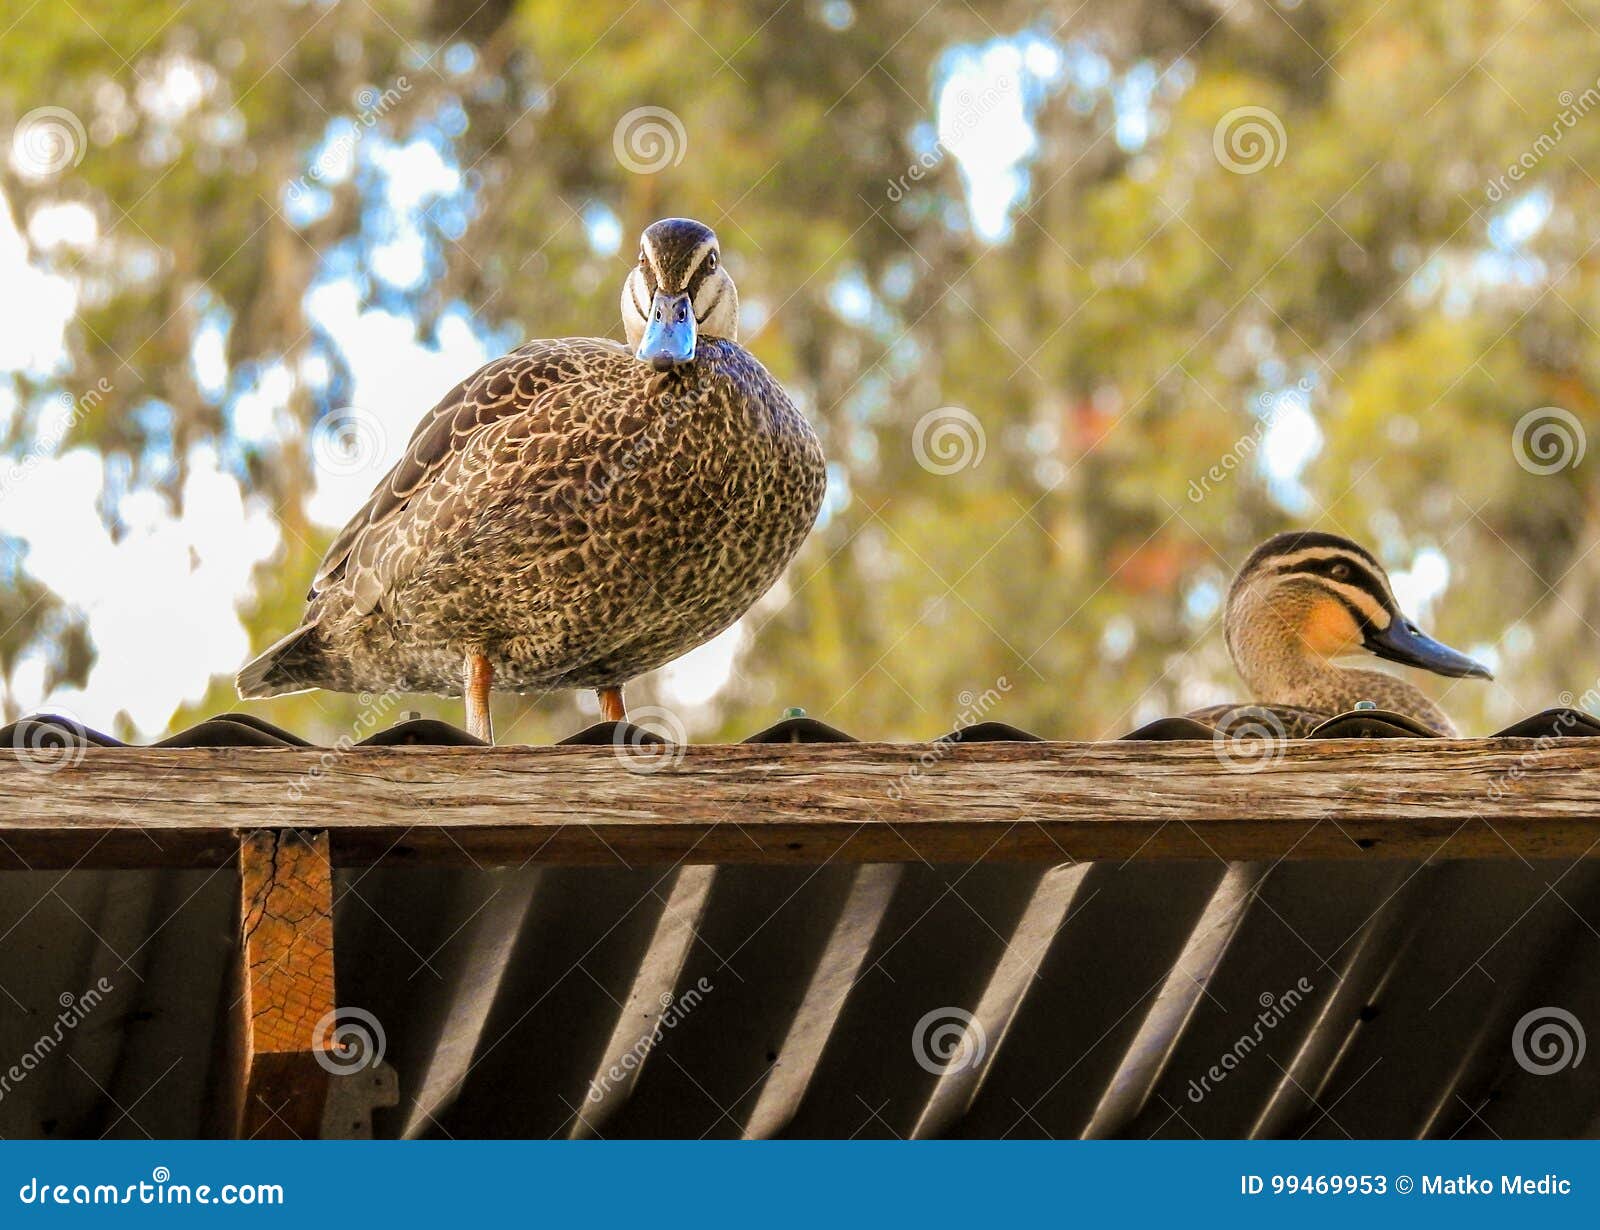 Ducks On The Roof